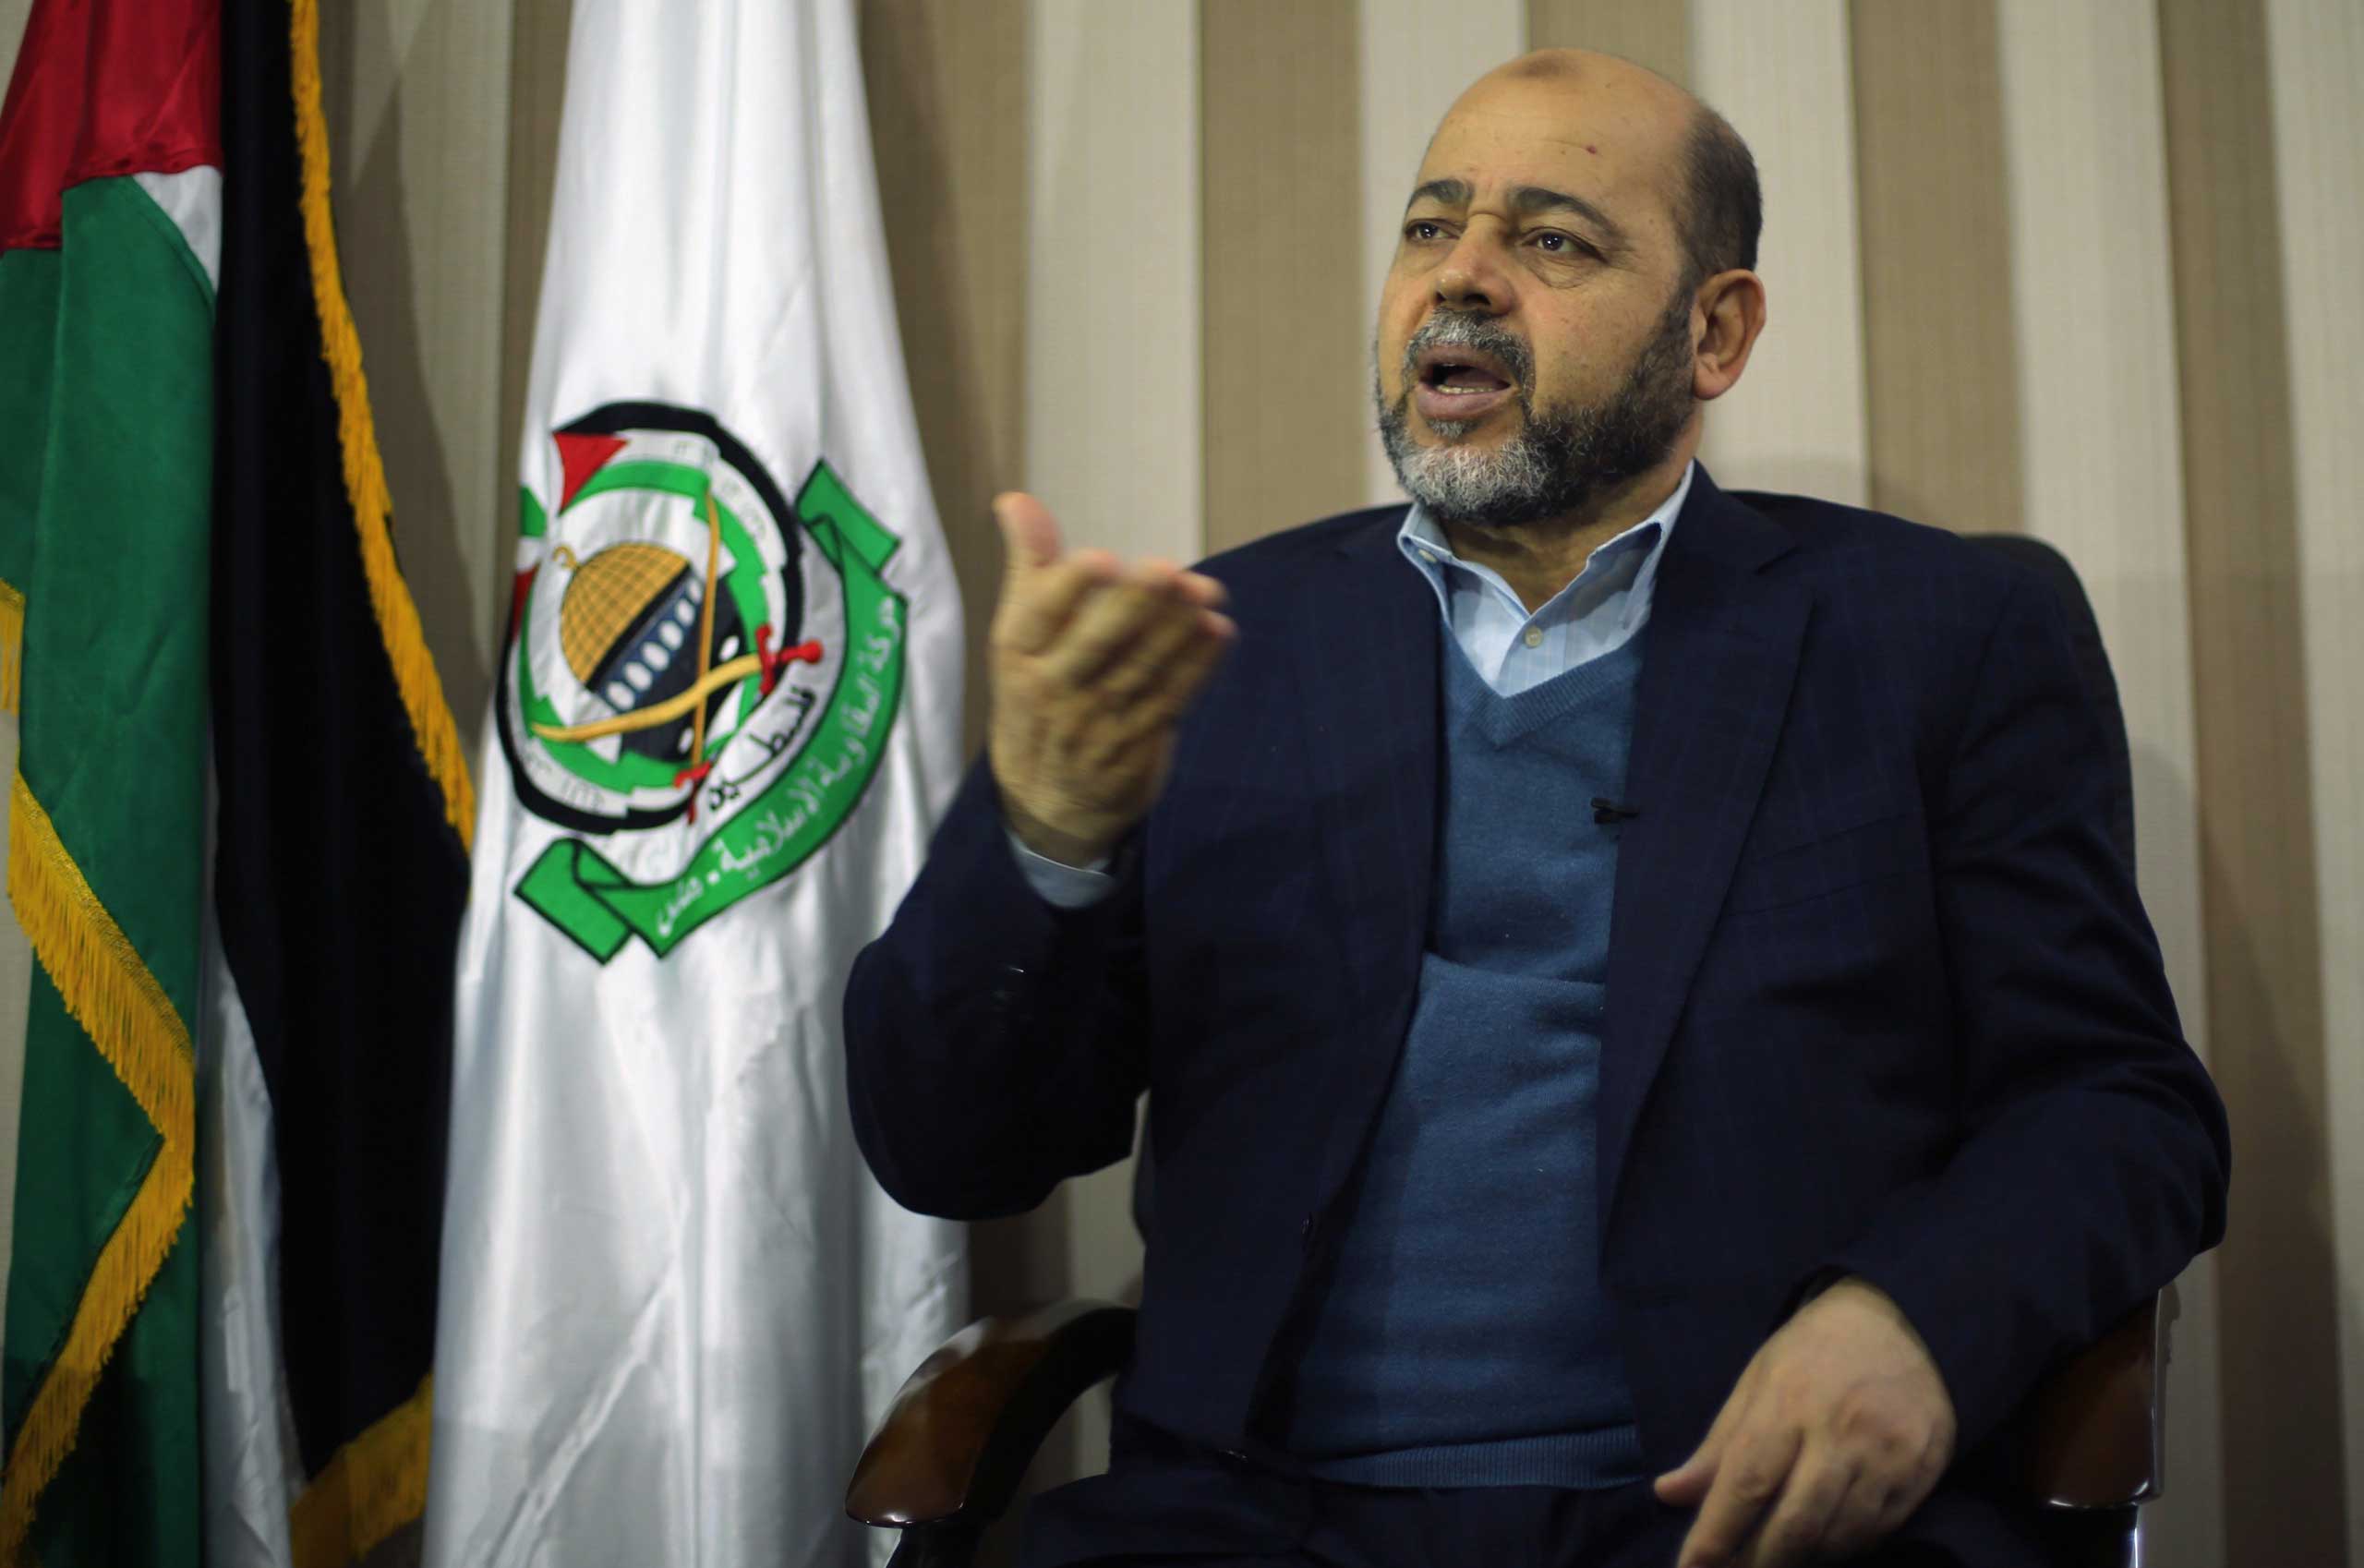 Deputy Hamas chief Moussa Abu Marzouk gestures during an interview with Reuters in Gaza City, Dec. 17, 2014. (Mohammed Salem—Reuters)